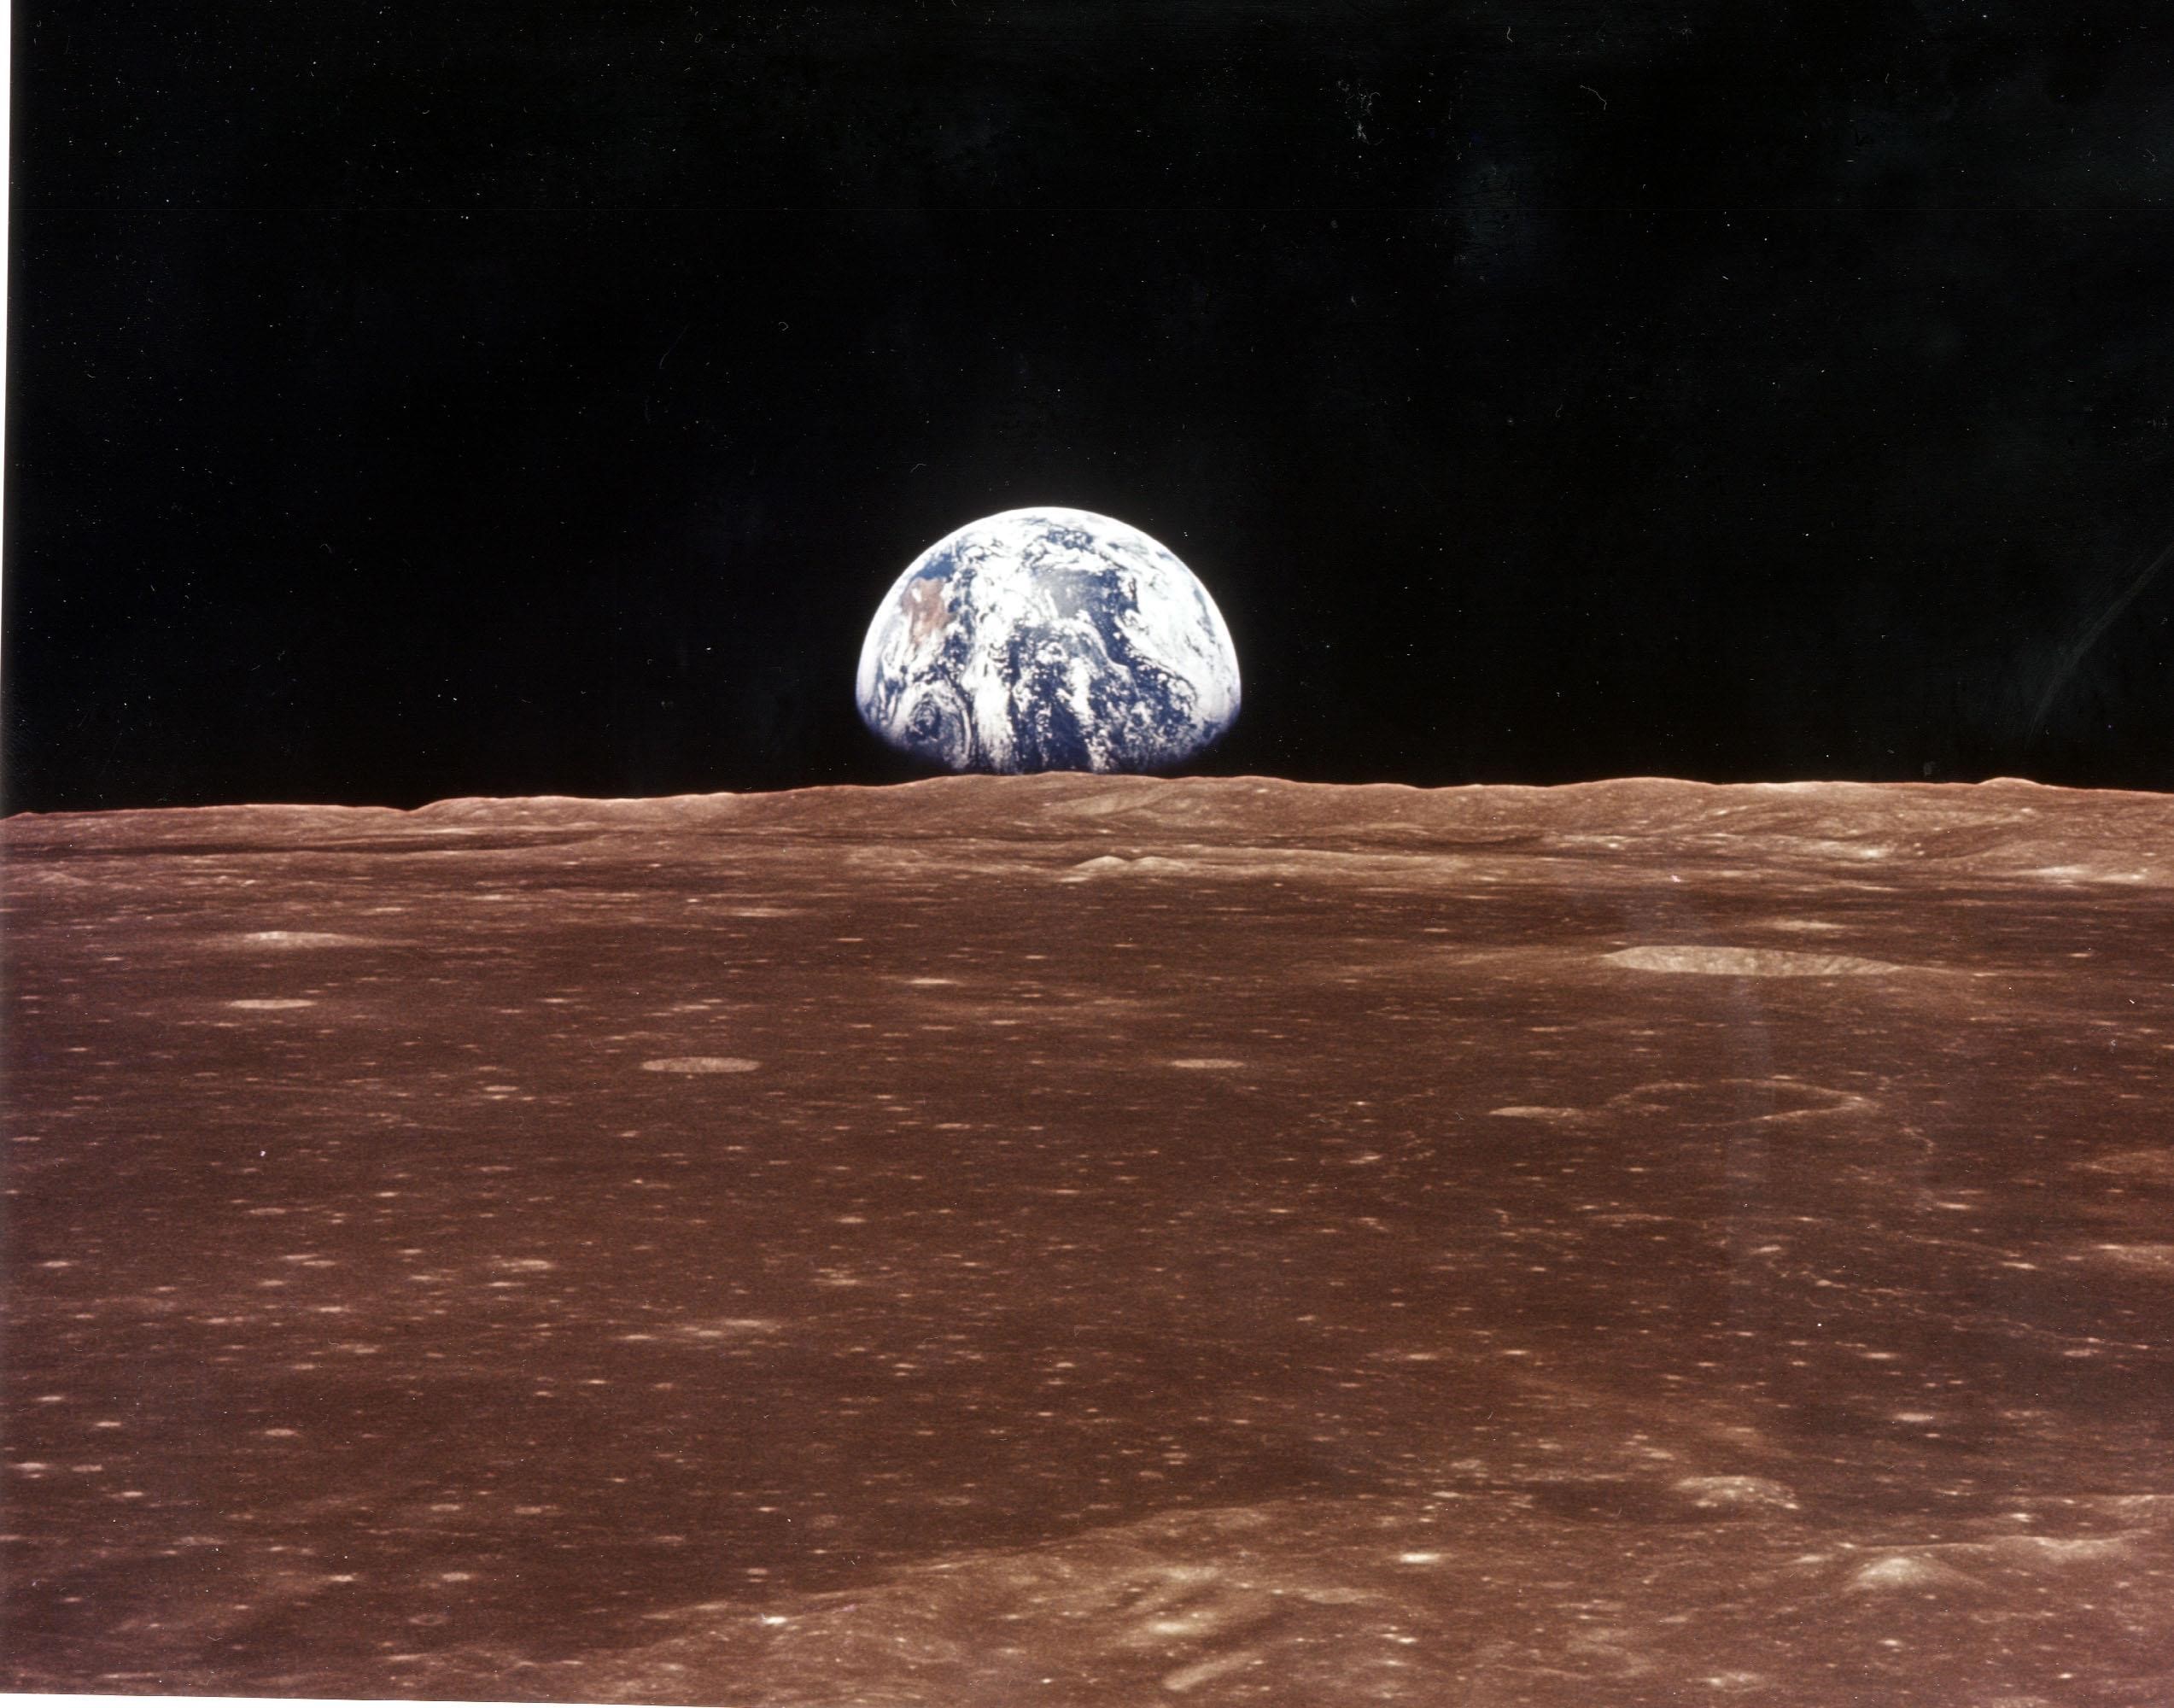 A photo taken by astronauts form Apollo 11 of Earth from the Moon